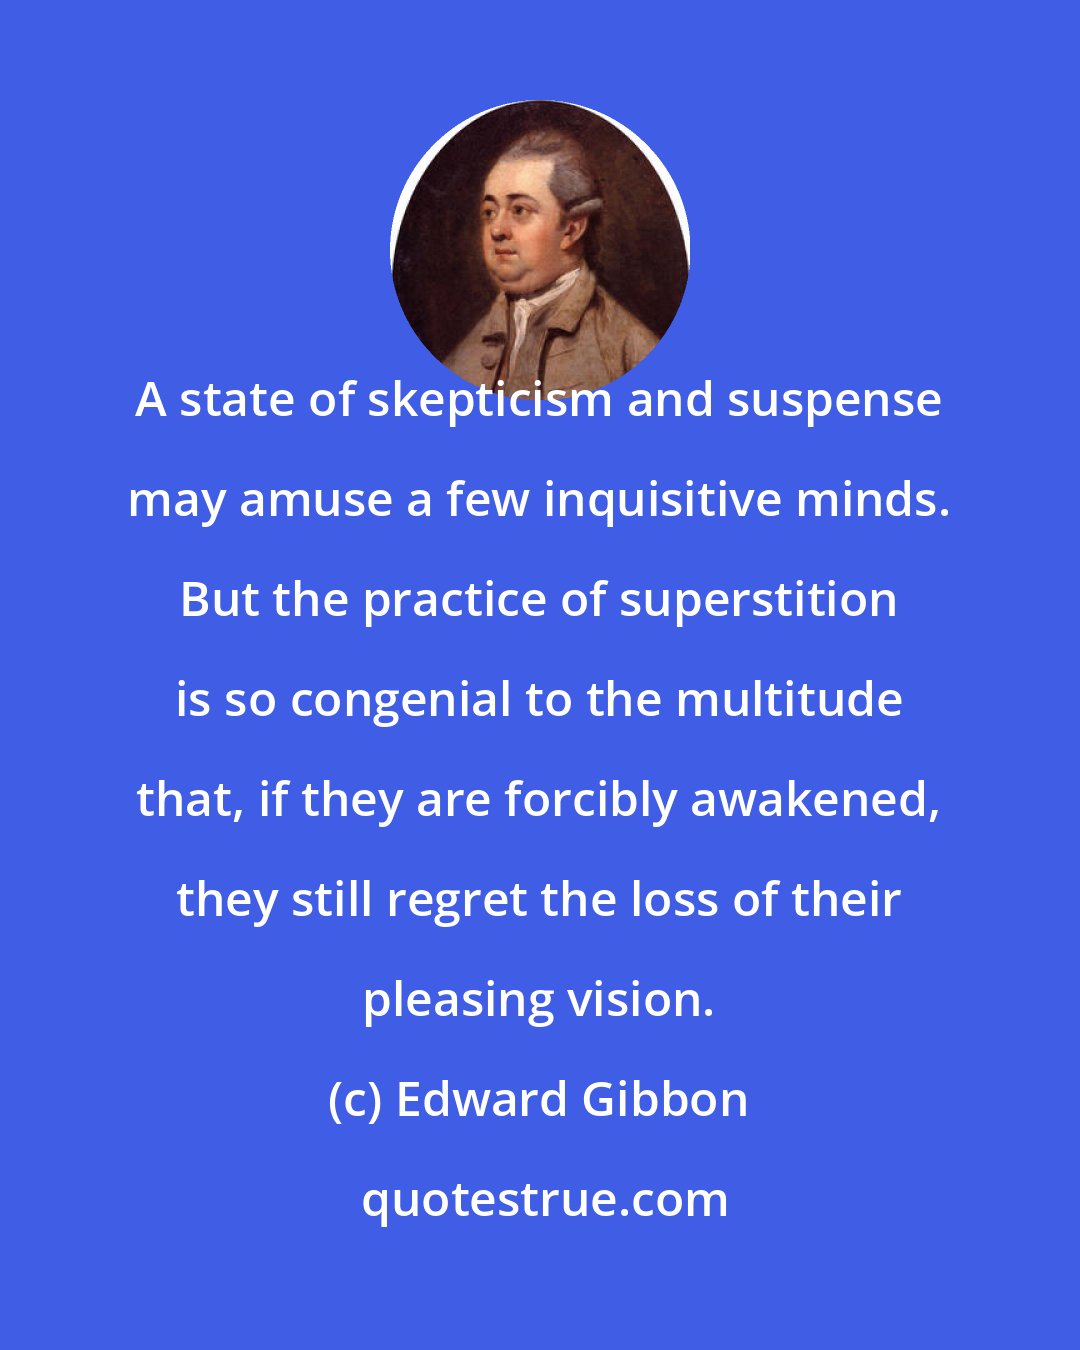 Edward Gibbon: A state of skepticism and suspense may amuse a few inquisitive minds. But the practice of superstition is so congenial to the multitude that, if they are forcibly awakened, they still regret the loss of their pleasing vision.